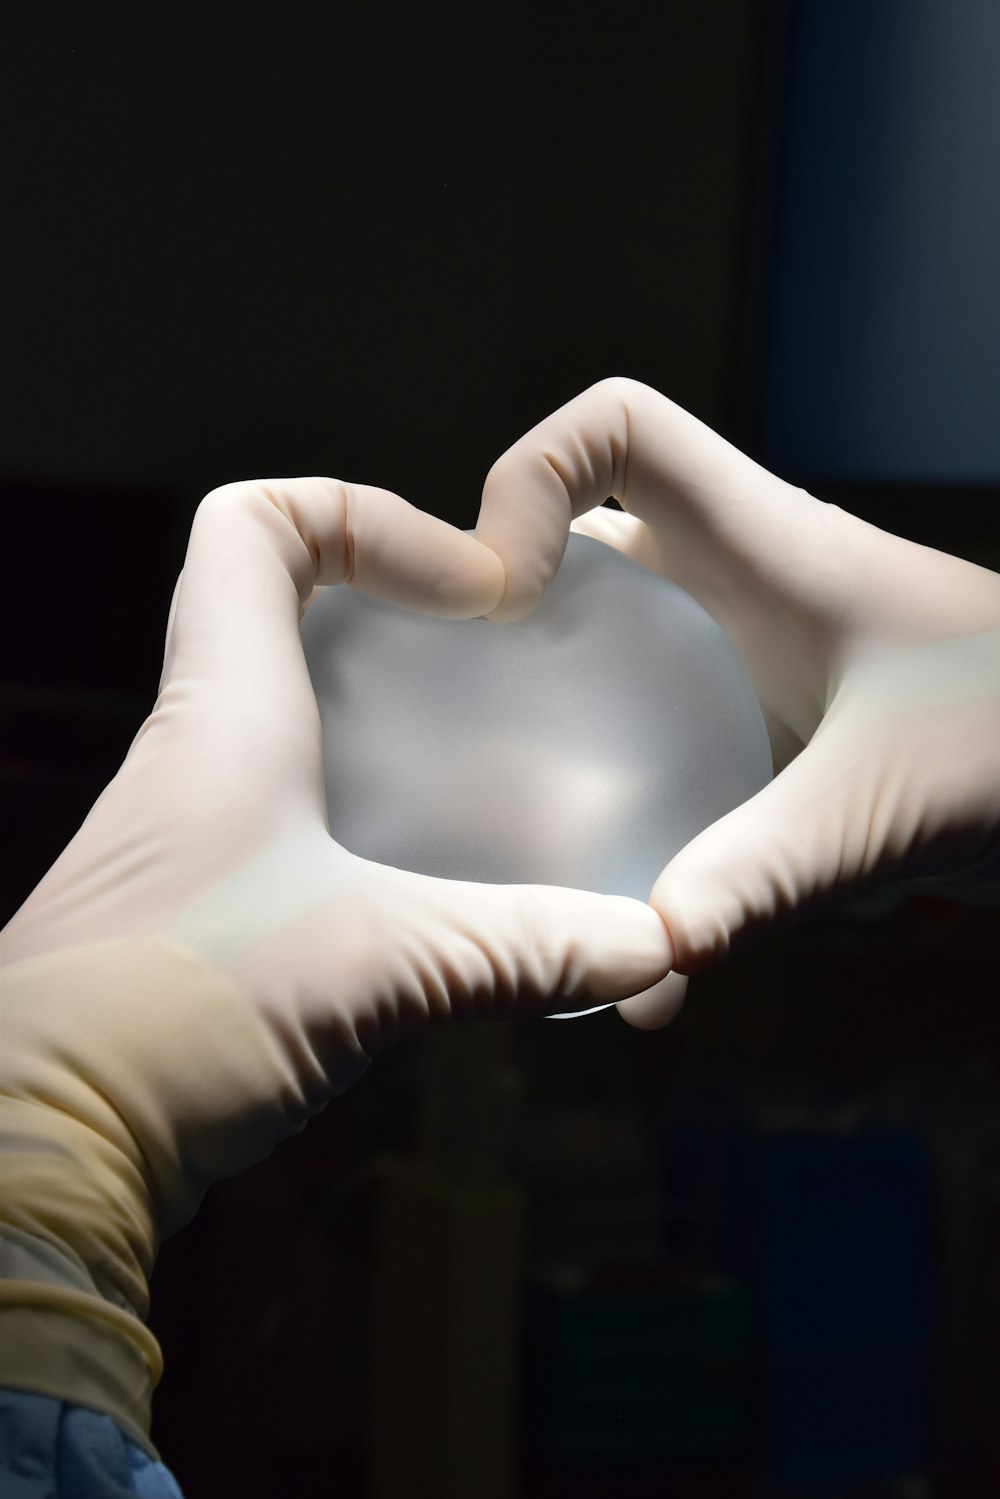 a person in white gloves holding a heart shaped object